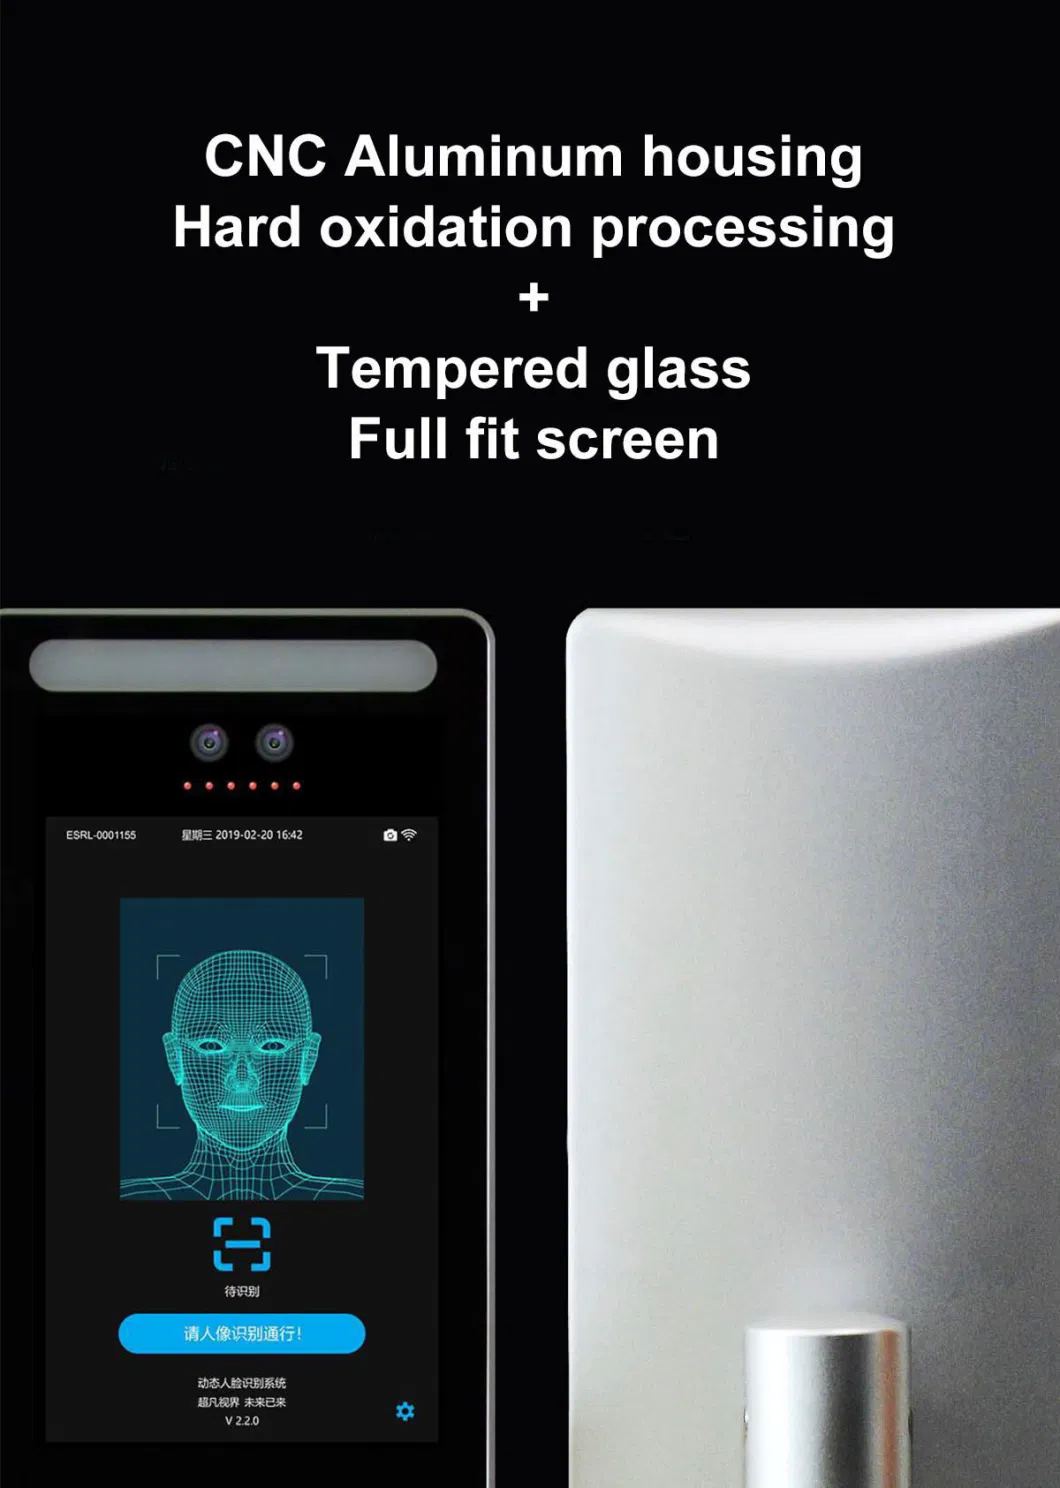 Body Face Recognition Temperature Detection Face Recognition Measurement Terminal All in One Machine Fever Alarm